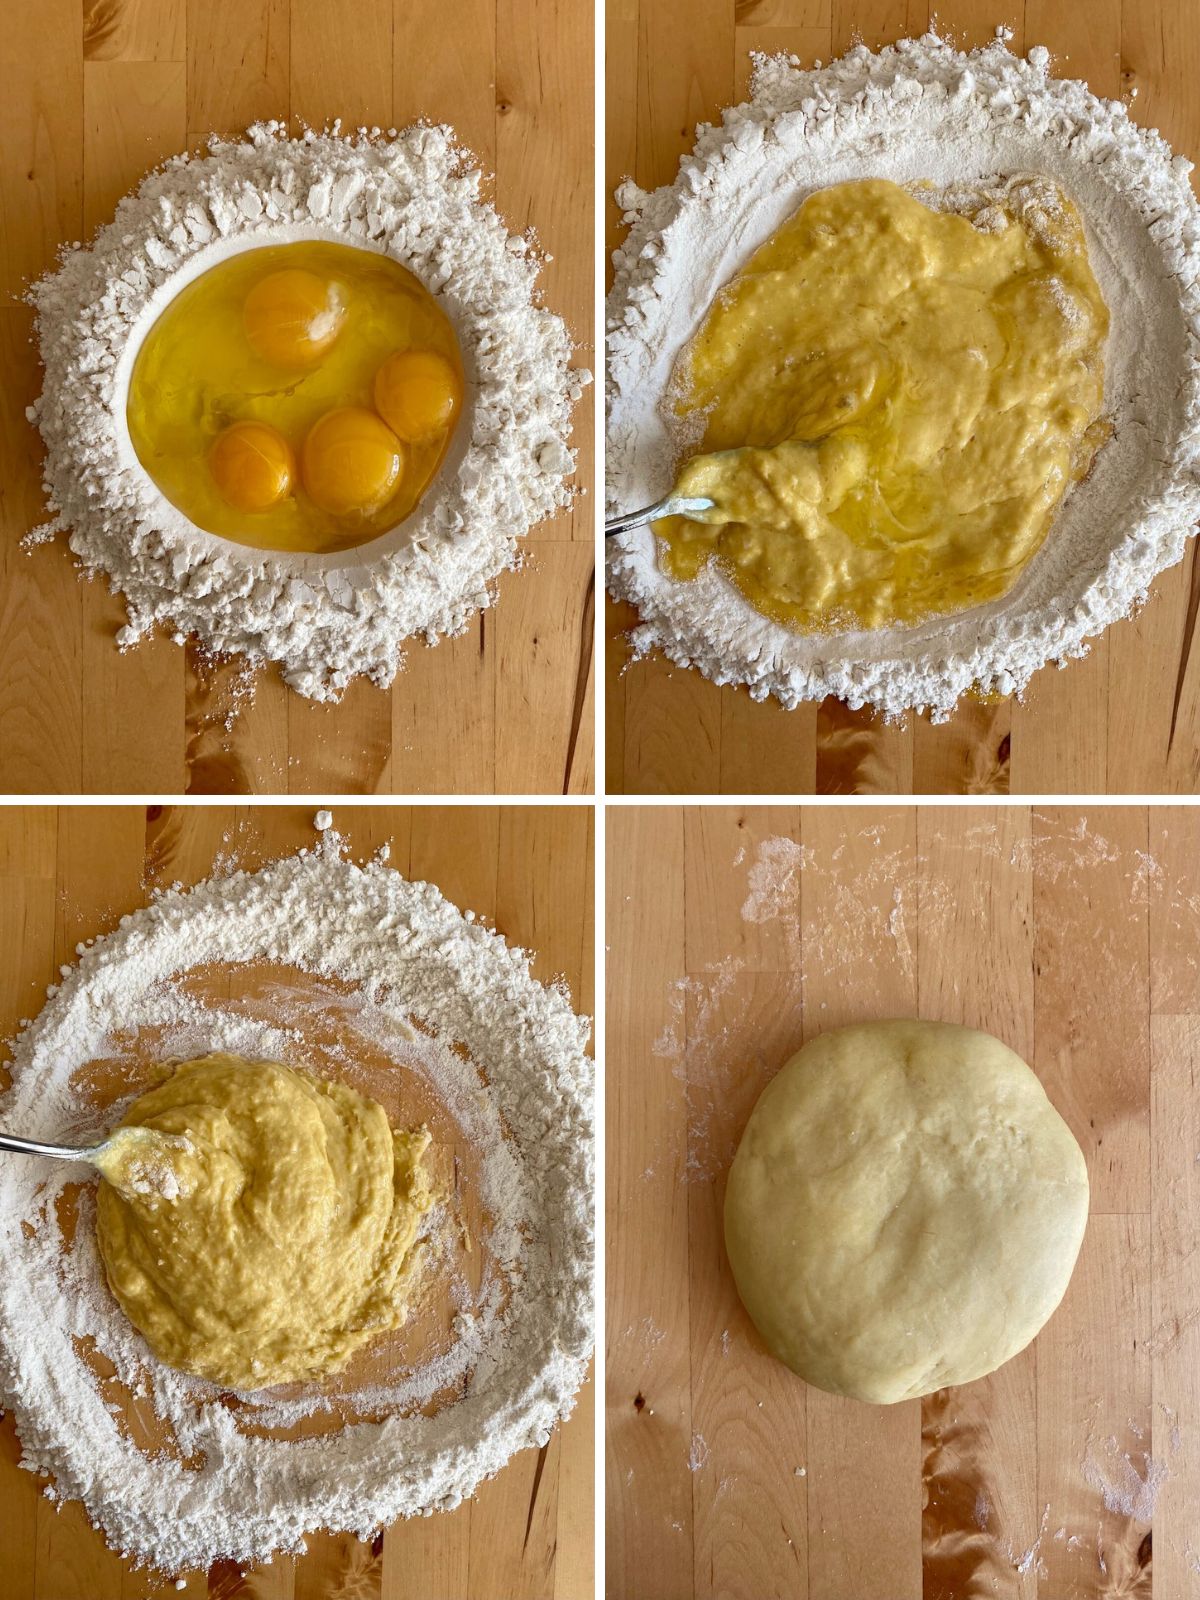 A grid showing the steps to make the fresh pasta dough. The first image is a flour well with raw eggs inside the center. The second image shows a thick batter in the middle of the well. The next step shows a thicker pasta dough with some raw flour still around it. The final picture shows a smooth dough ball.